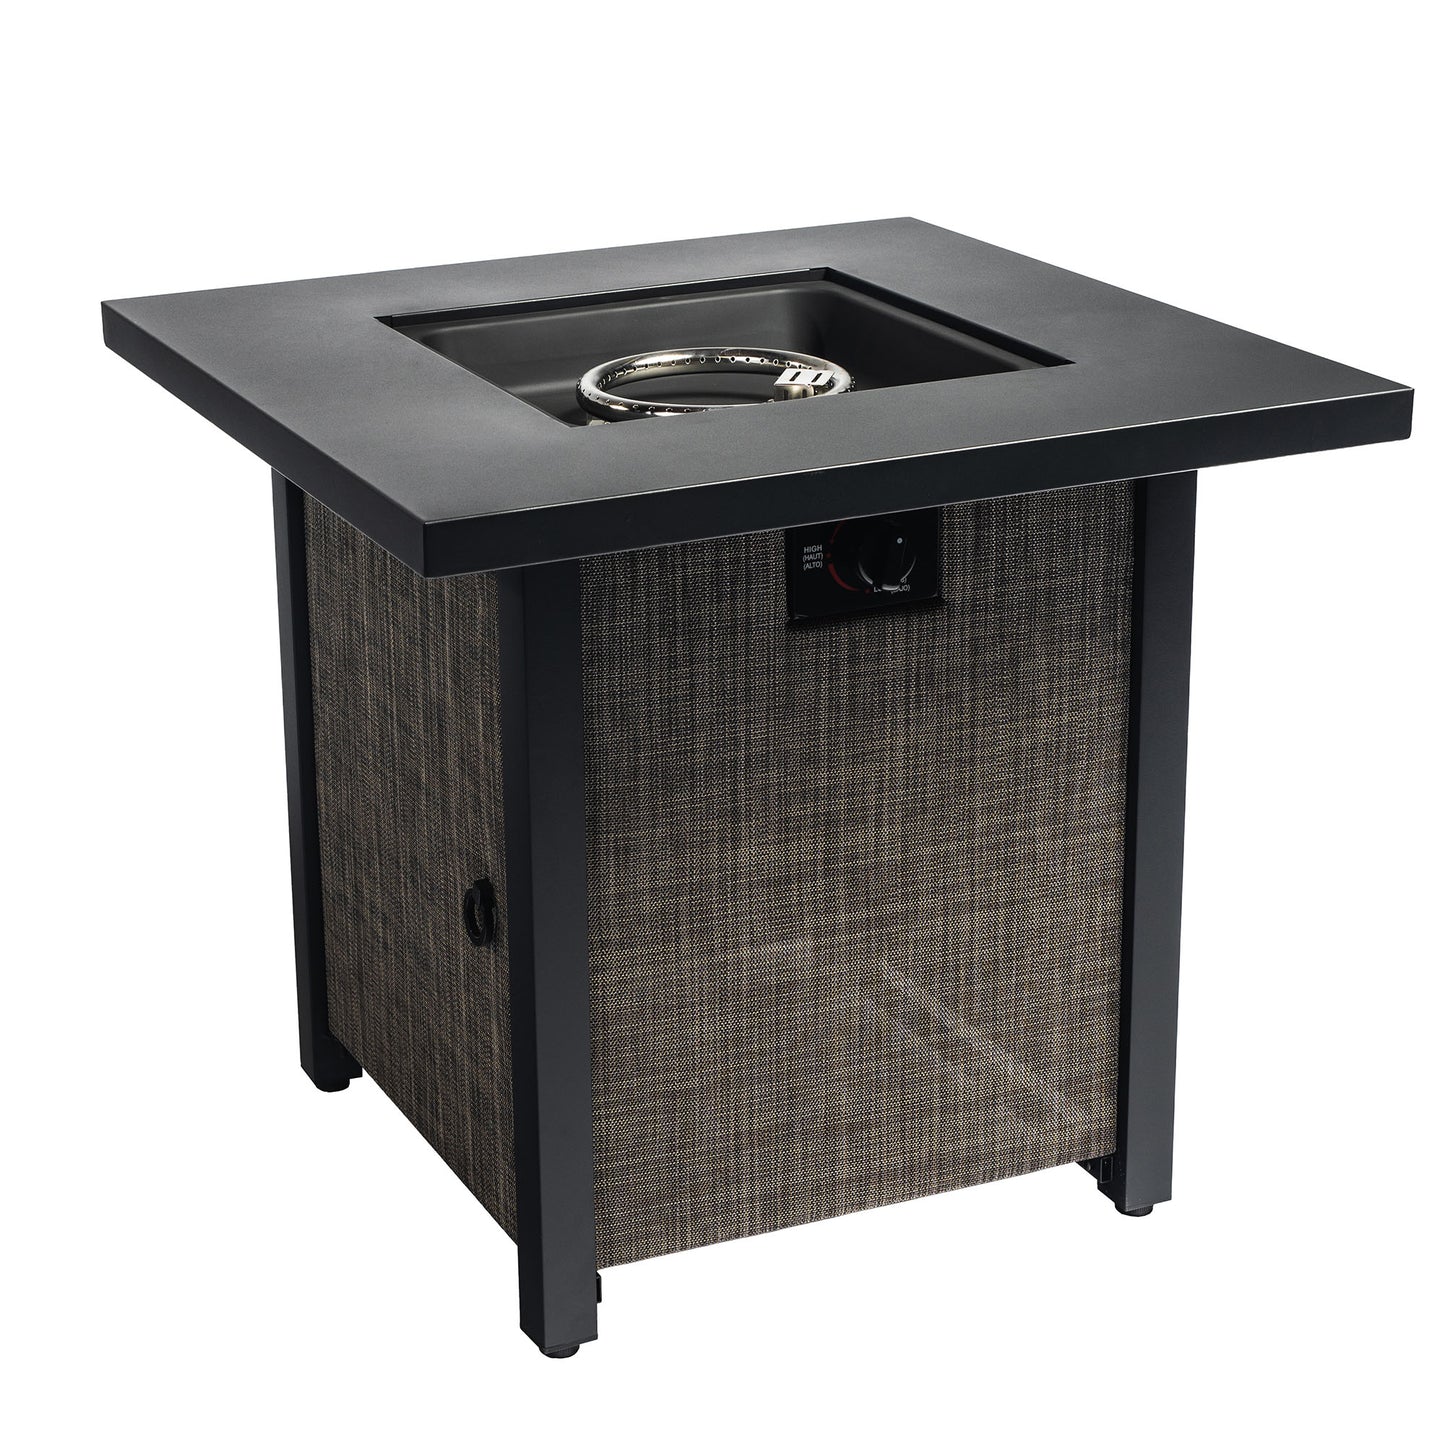 40000BTU Square Propane Fire Pit Table Steel Tabletop